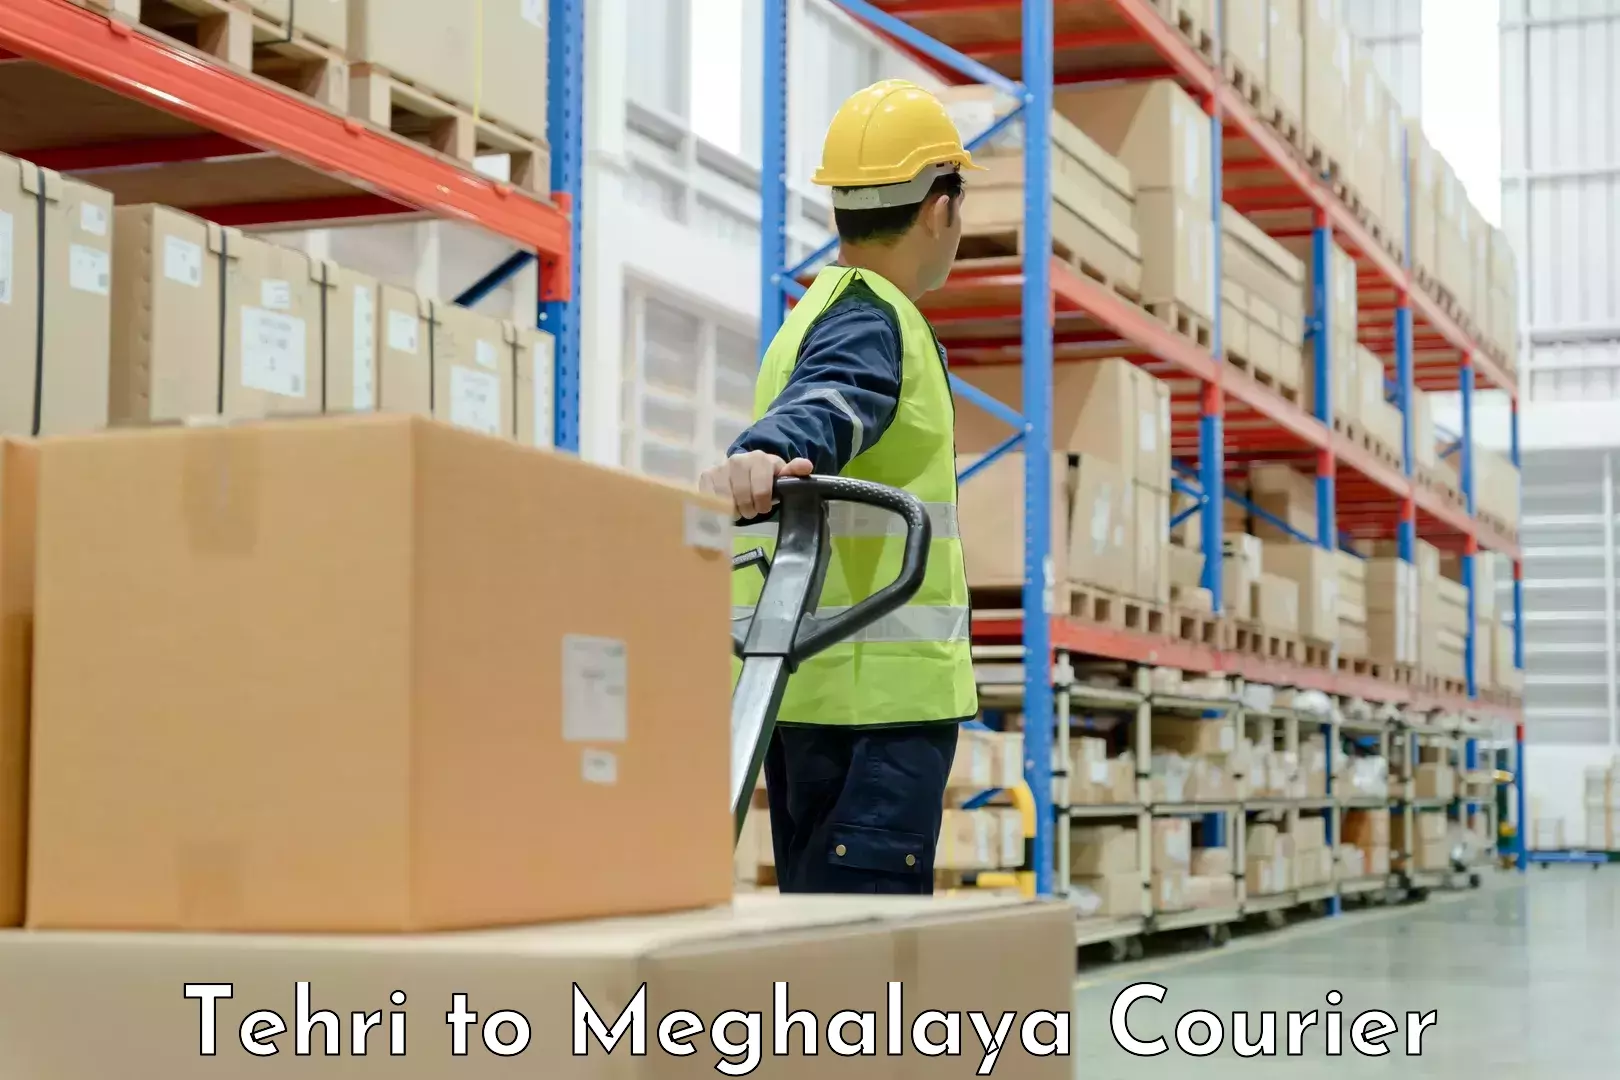 Moving and packing experts Tehri to Meghalaya